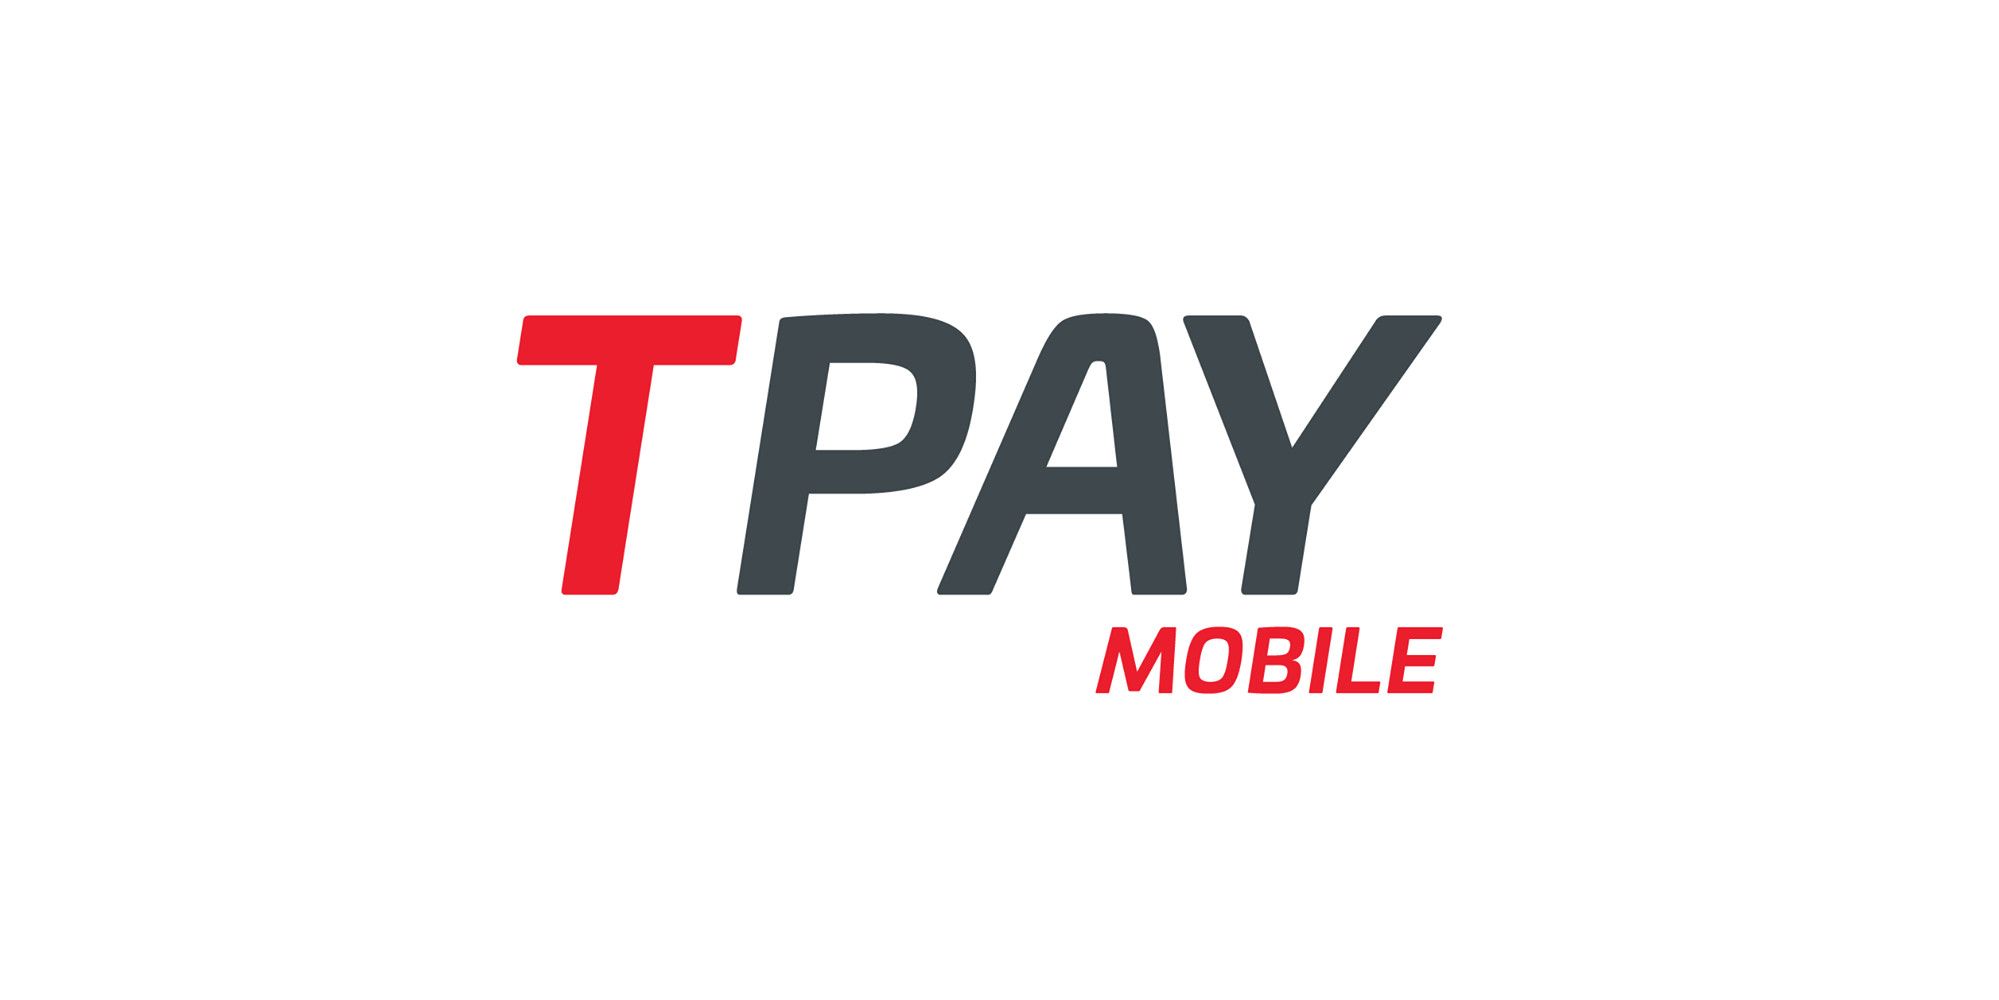 tpay mobile logo - red and grey text on a white background